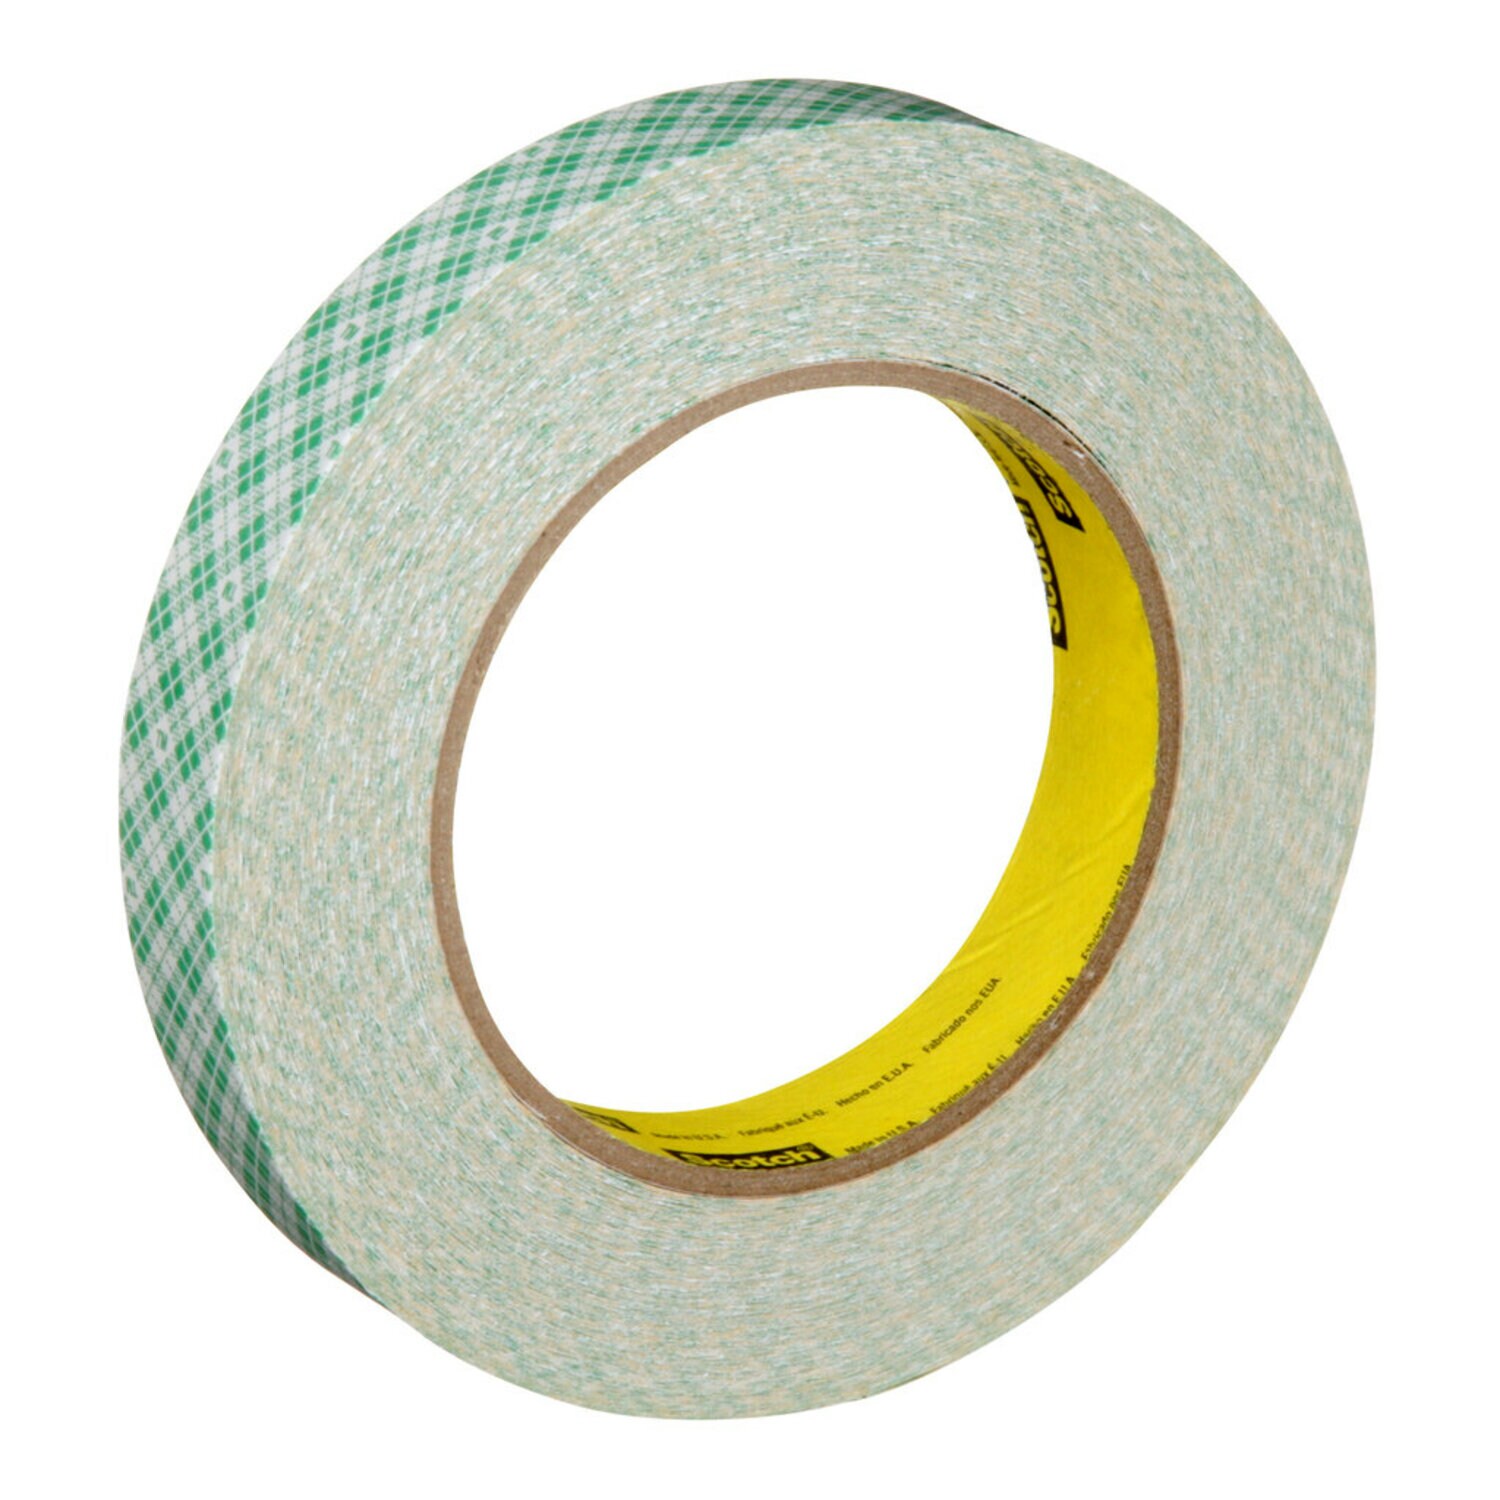 3M 410M Double Coated Paper Tape 1/2 x 36 yds (12mm x 33m)-single